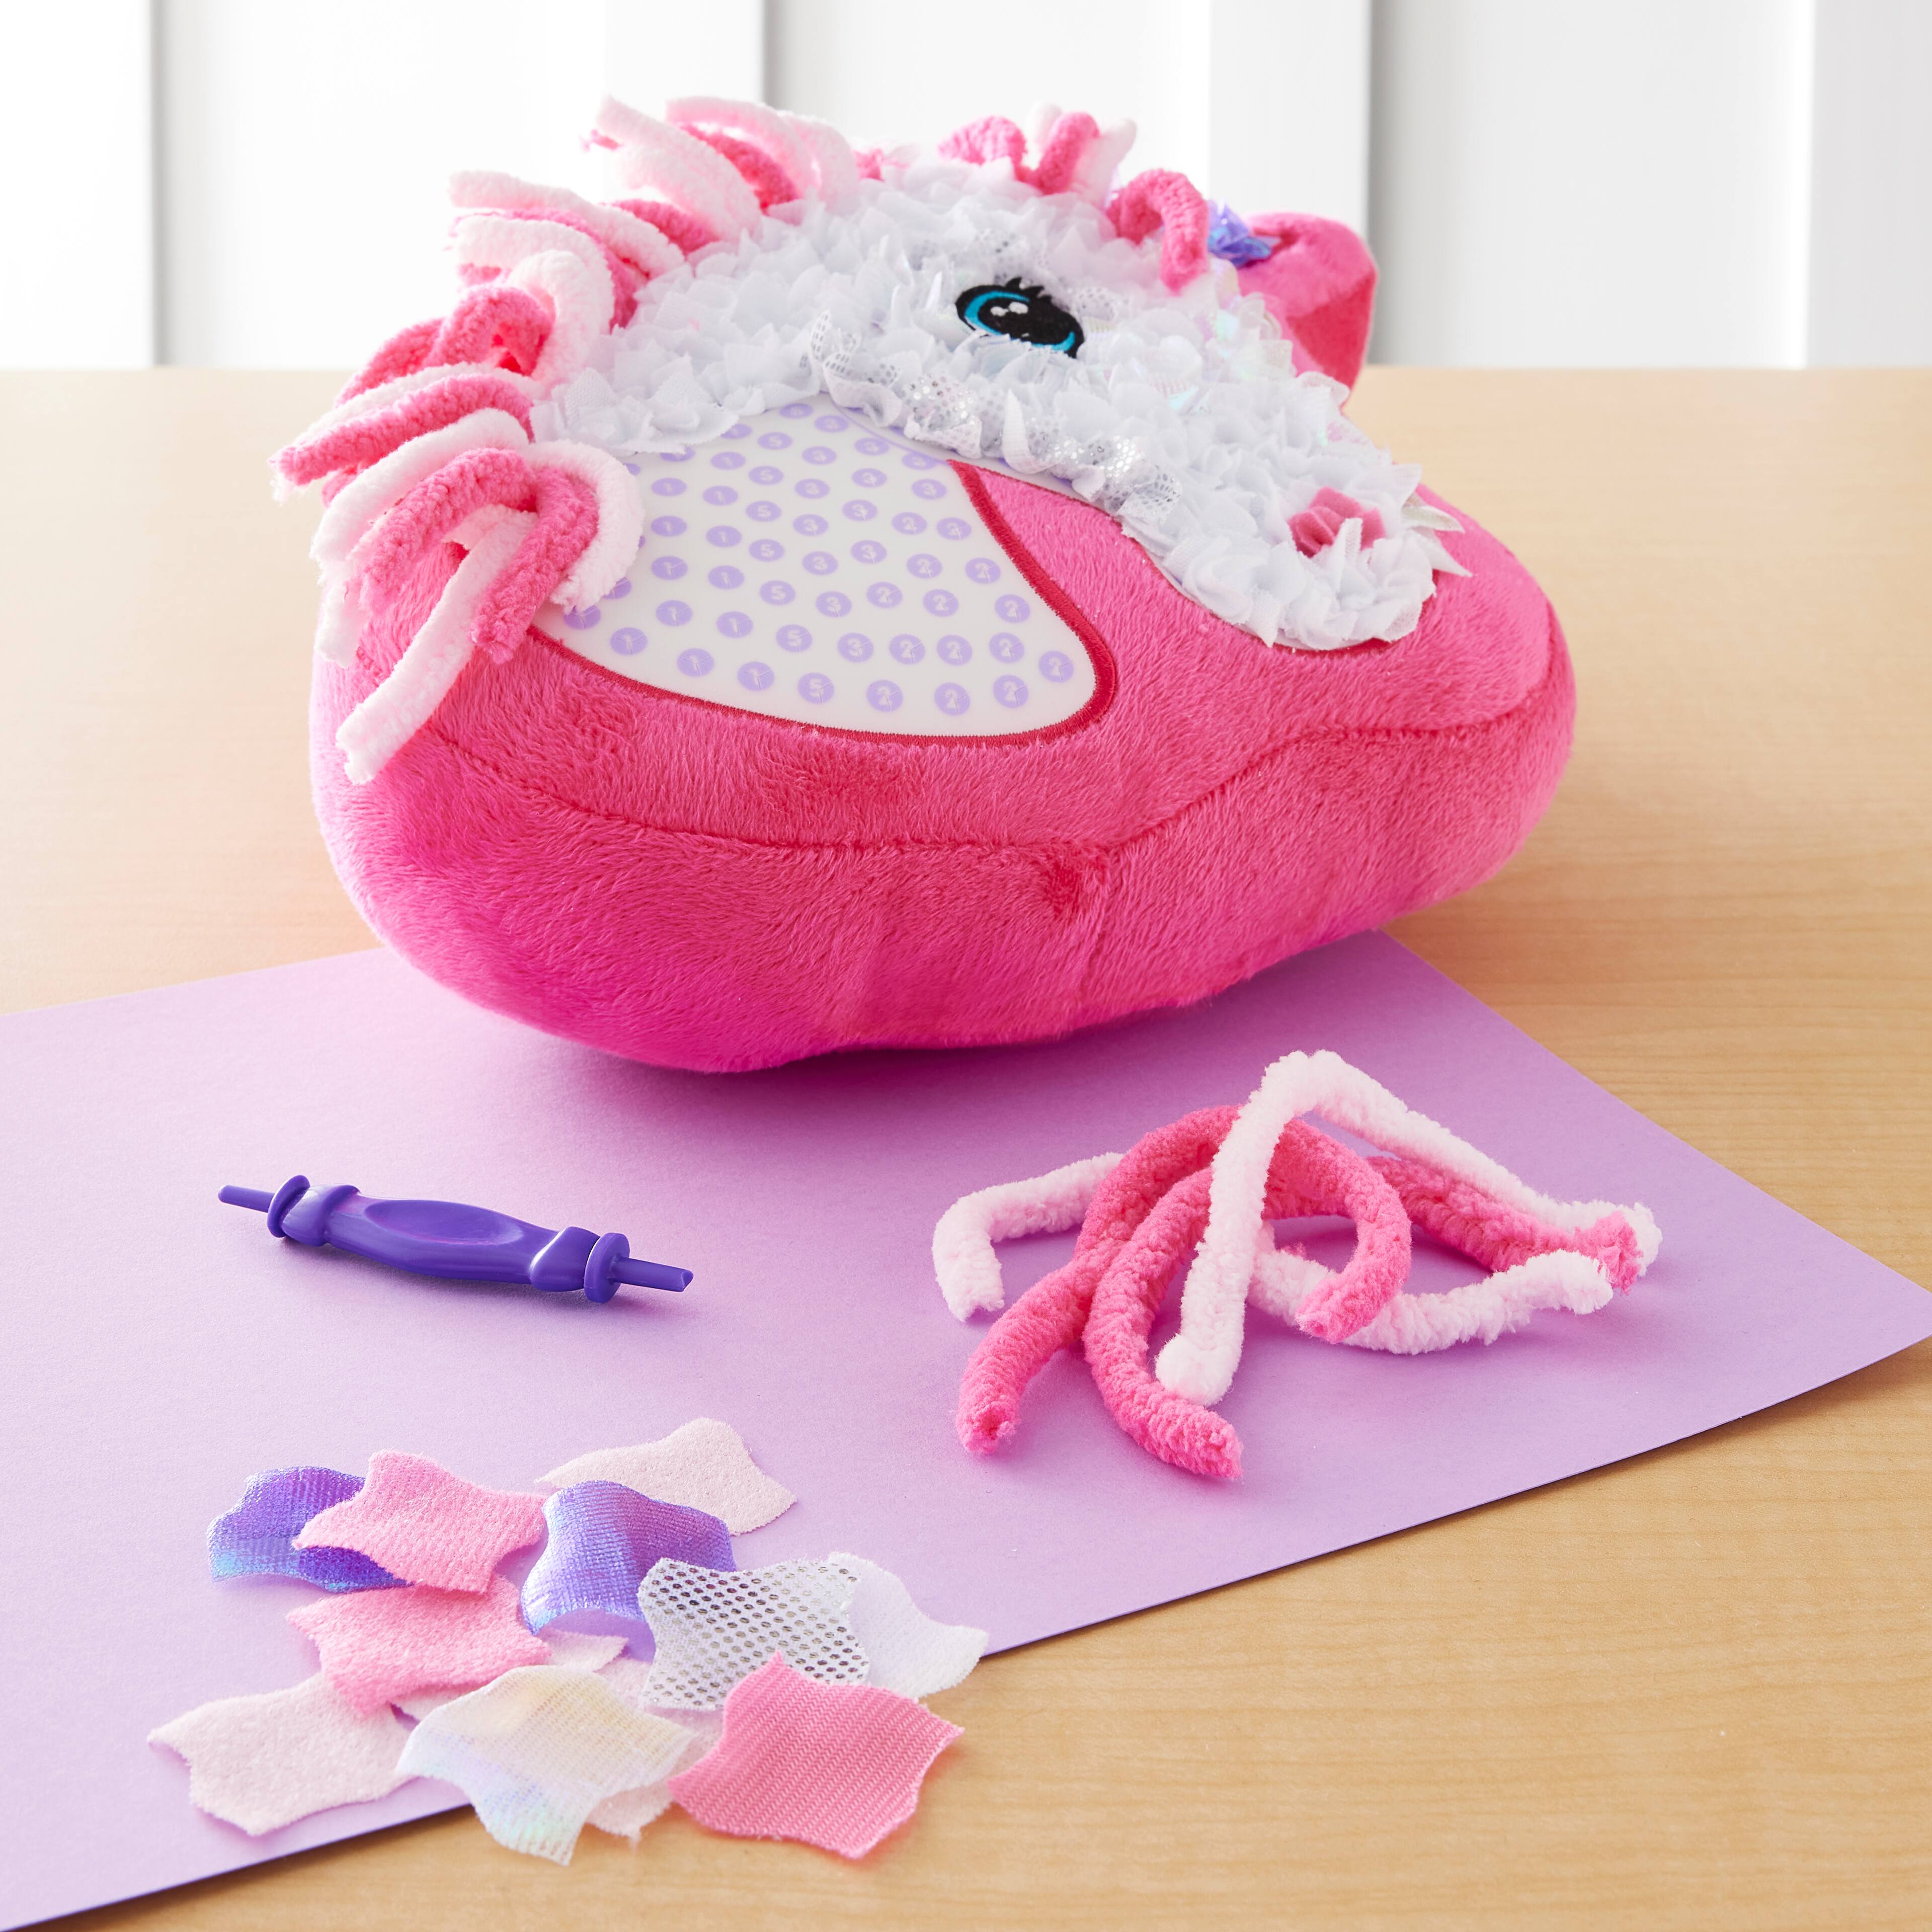 ORB PlushCraft Unicorn Pillow, Fabric by Number Art & Crafts, Ages 5 and  Up, No Sewing Required, 324 Pieces for Making Your Own DIY Unicorn Cozy